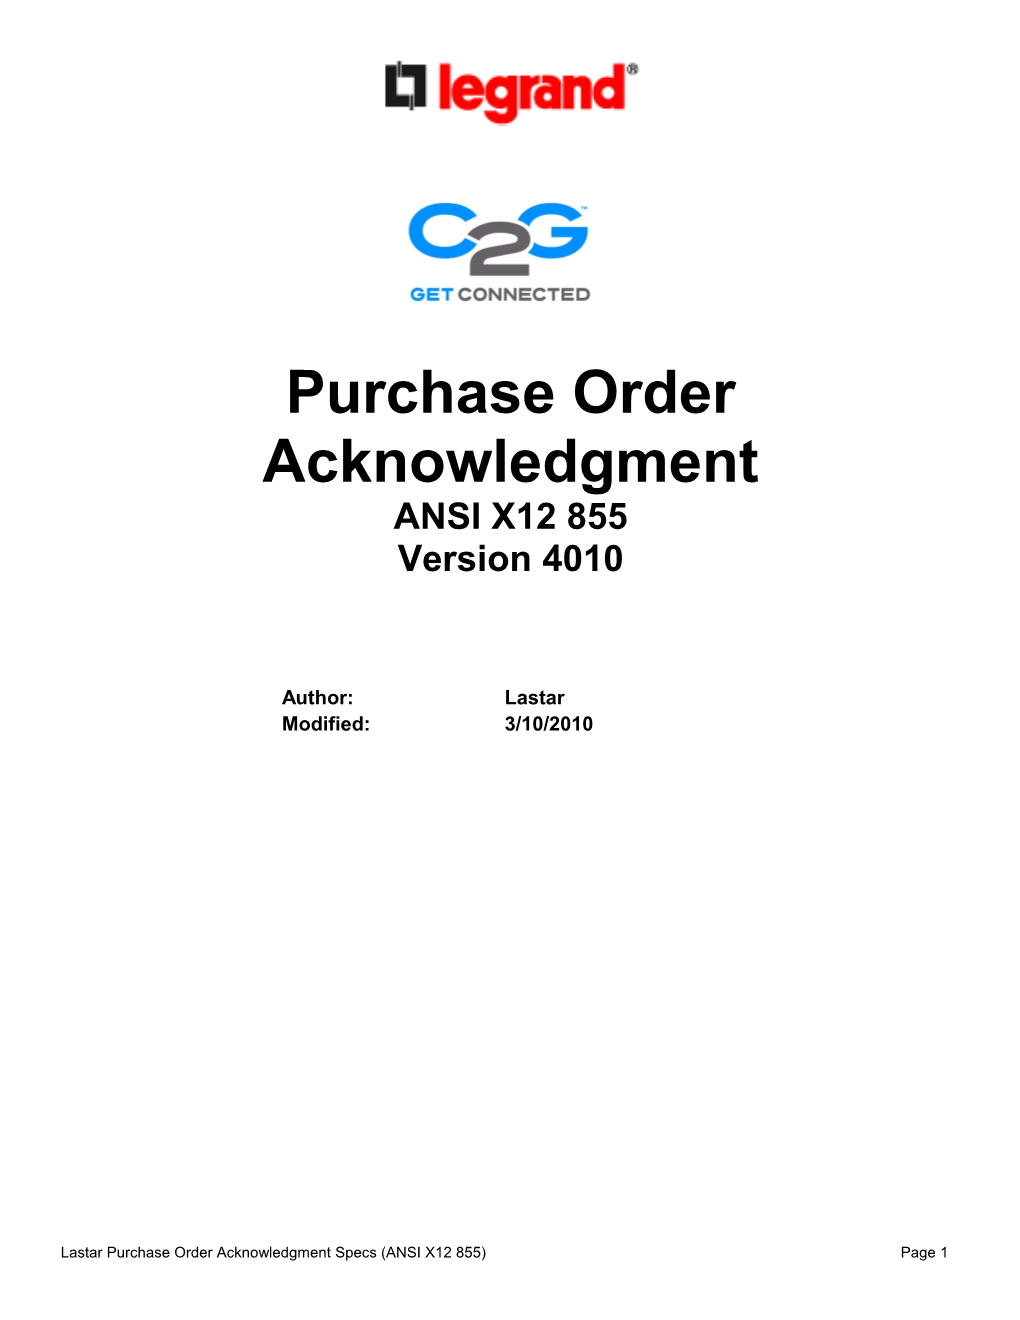 Purchase Order Acknowledgment